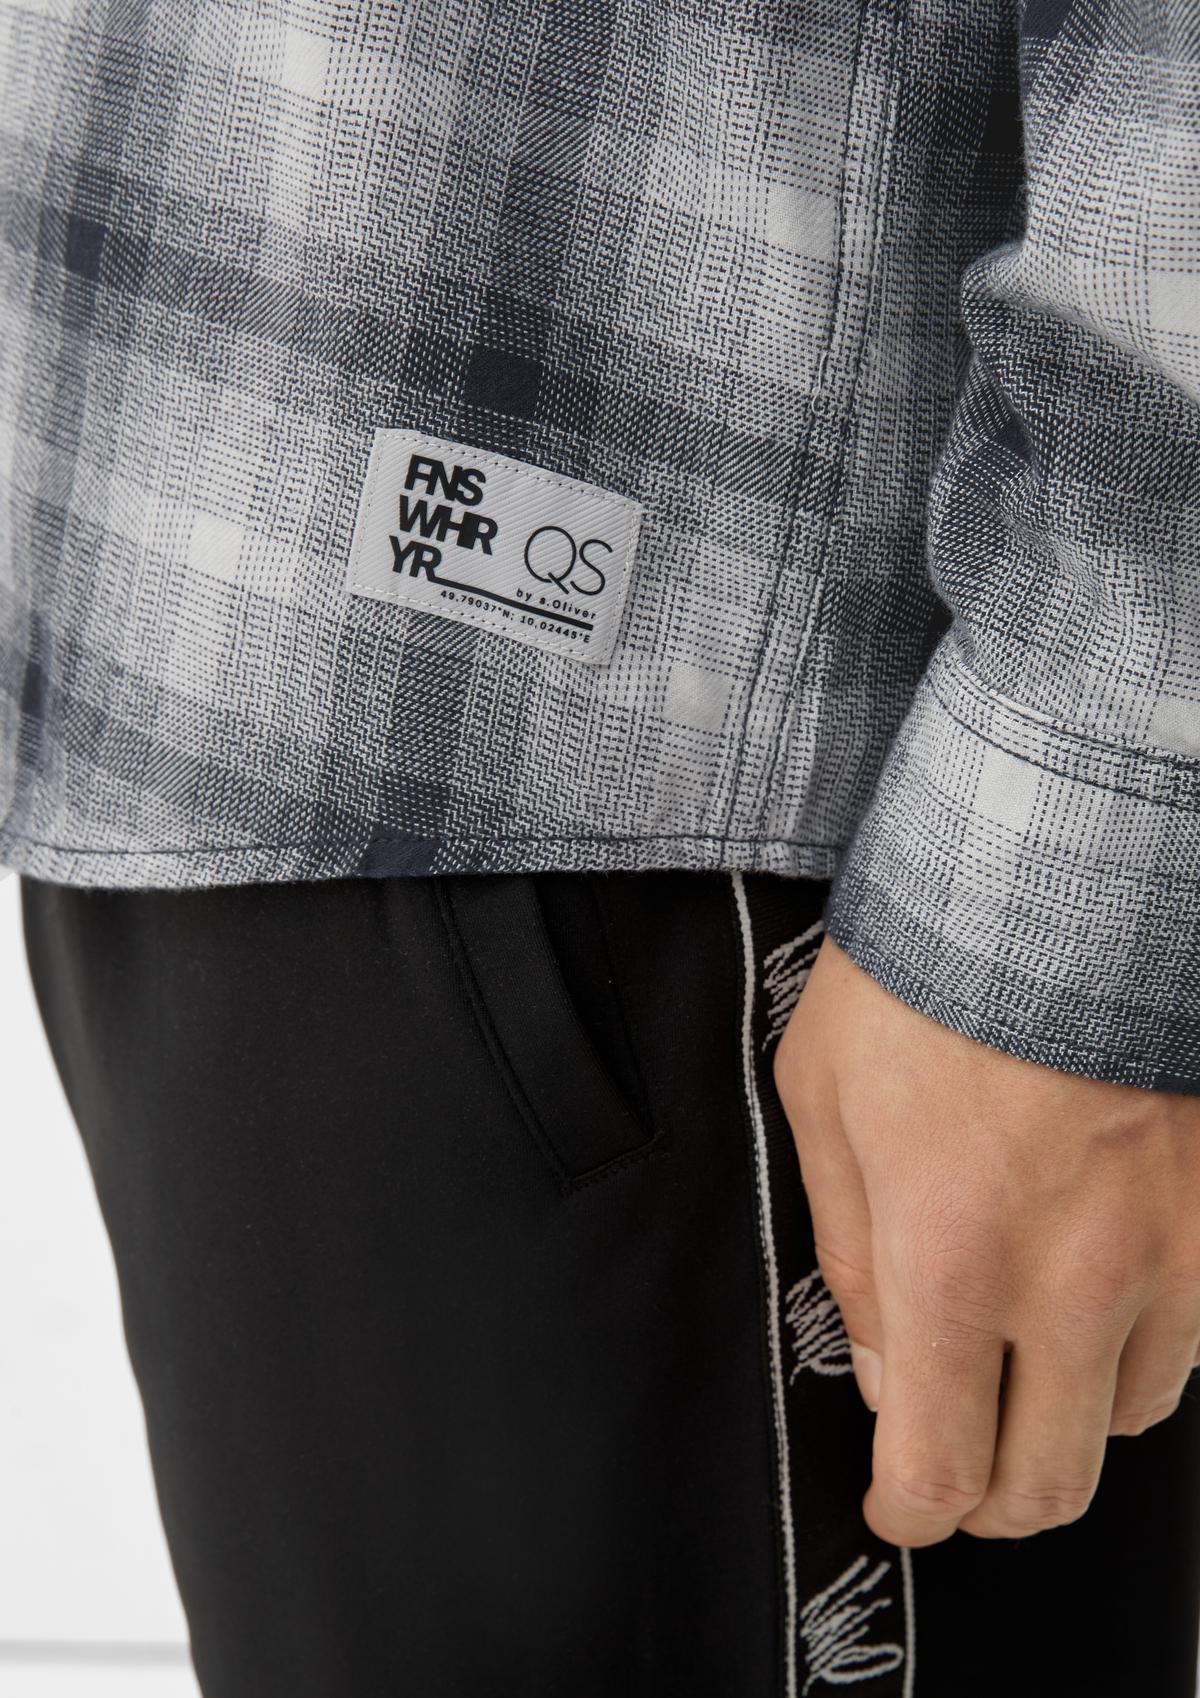 s.Oliver QS x JAMULE flannel shirt with a check pattern